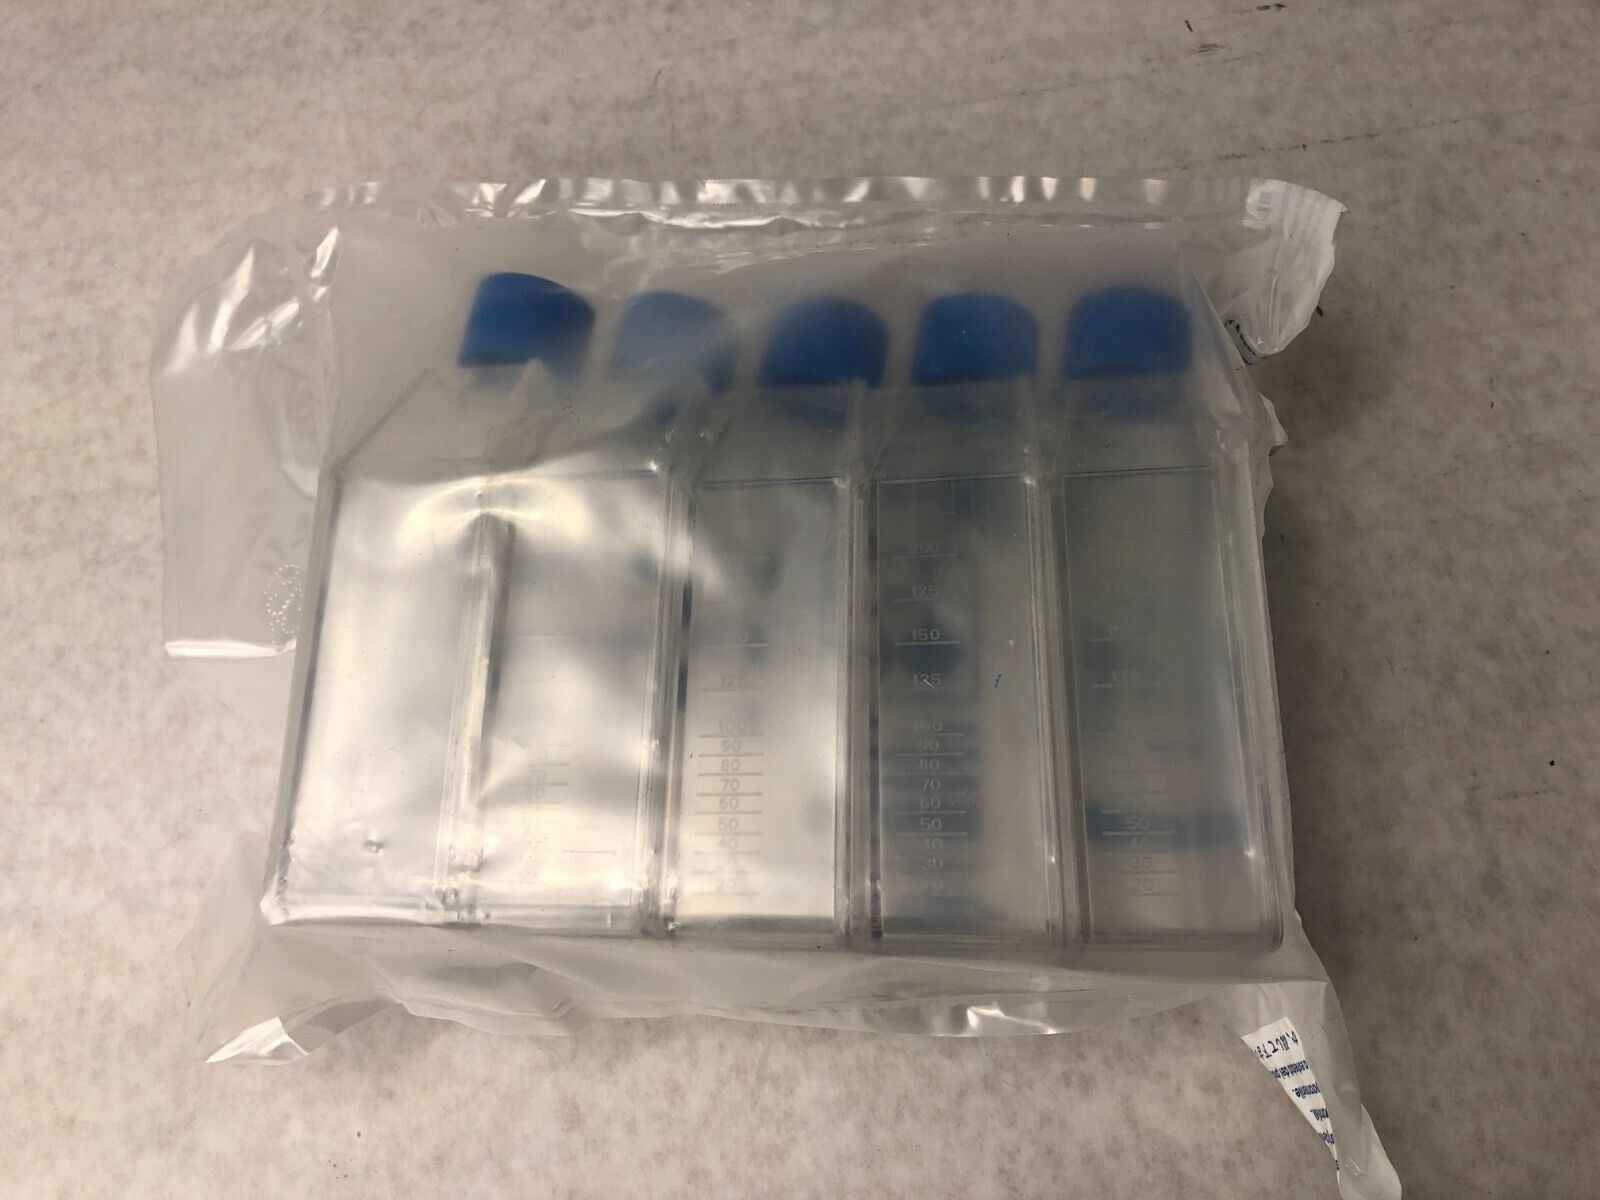 Falcon 353136 250ML Flask Canted Neck BLue Vented Cap Sterile Lot of 10